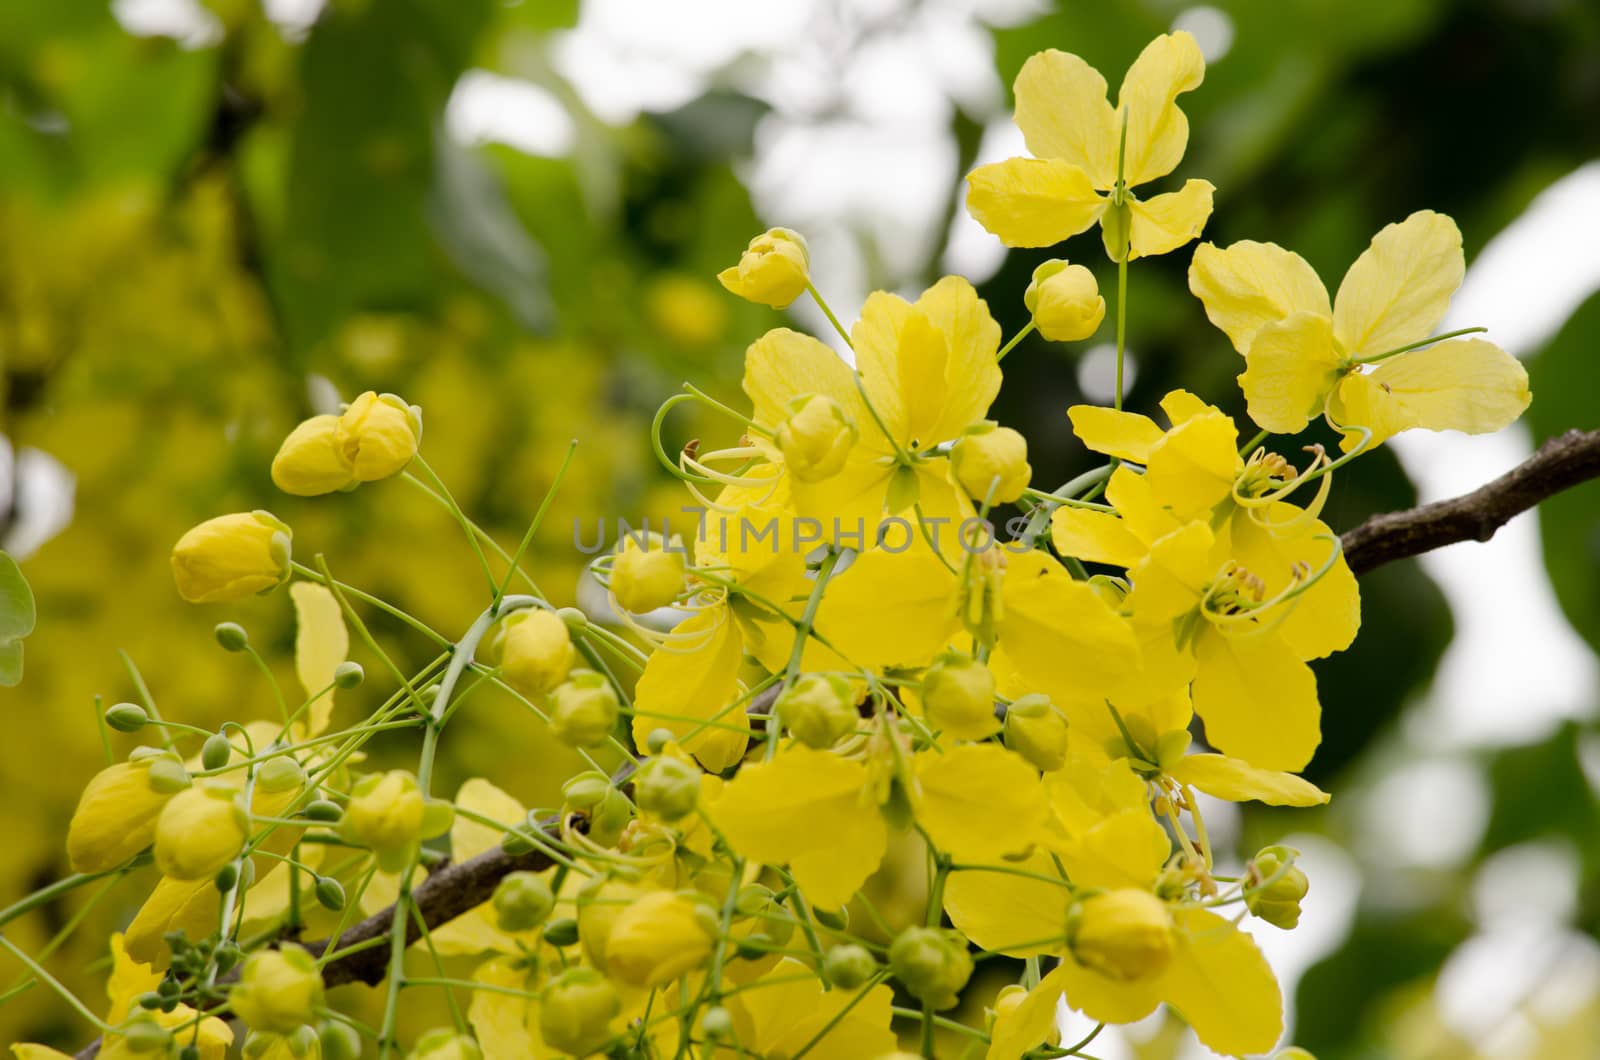 Cassia fistula  is the national tree of Thailand, and its flower is Thailand's national flower.It blooms in late spring. Flowering is profuse, with trees being covered with yellow flowers,